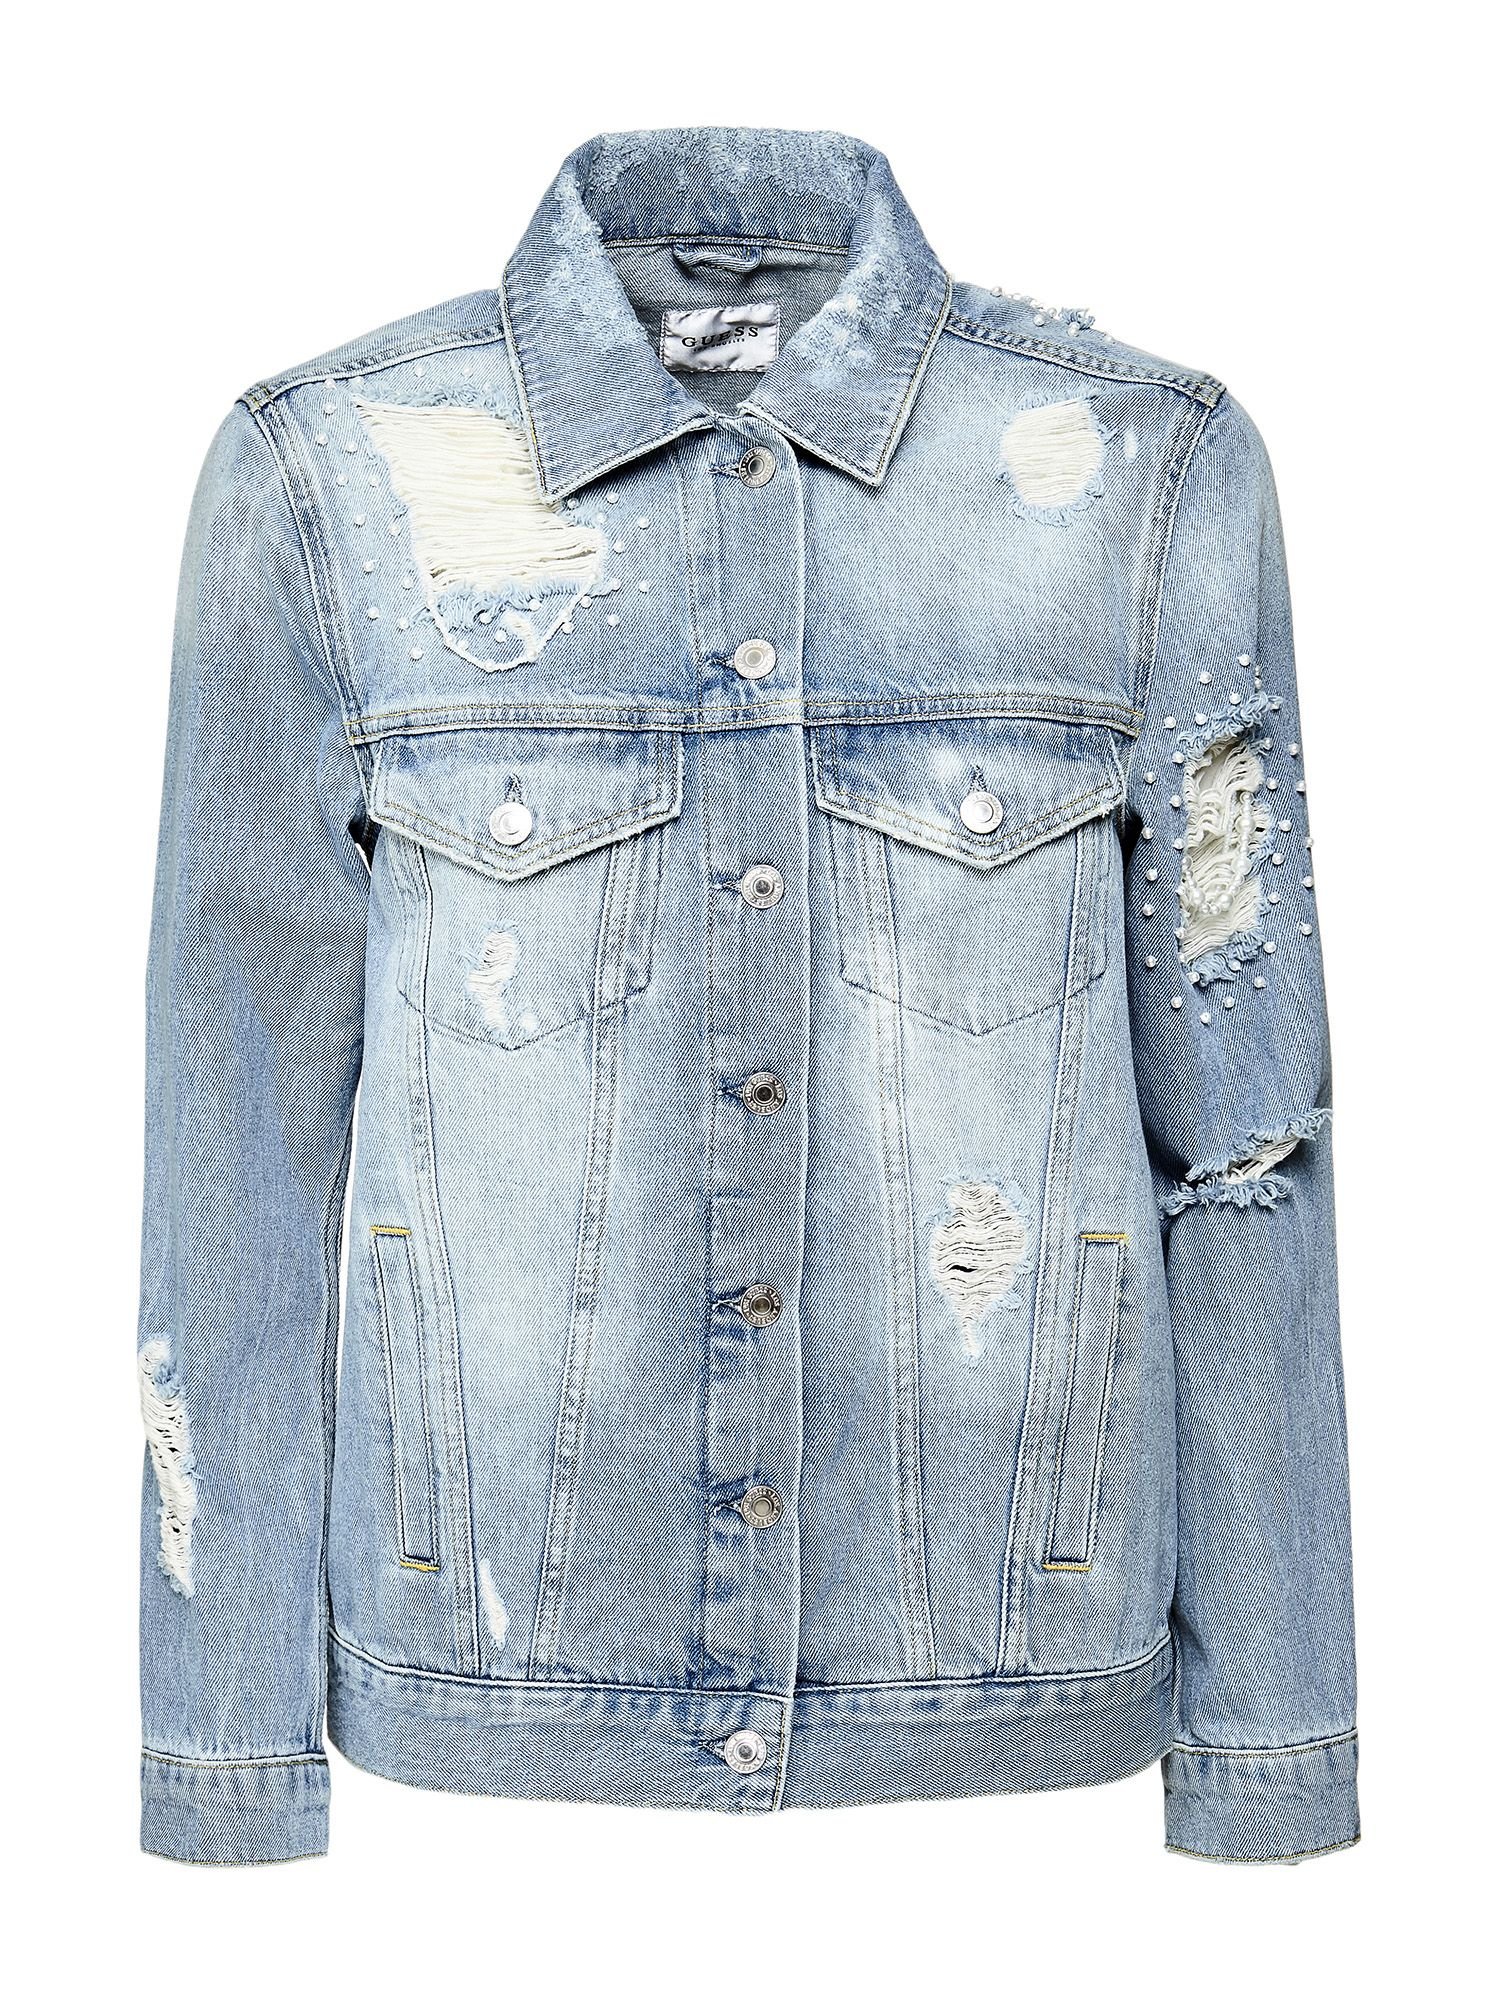 Guess Denim Jacket with Tears | Endource